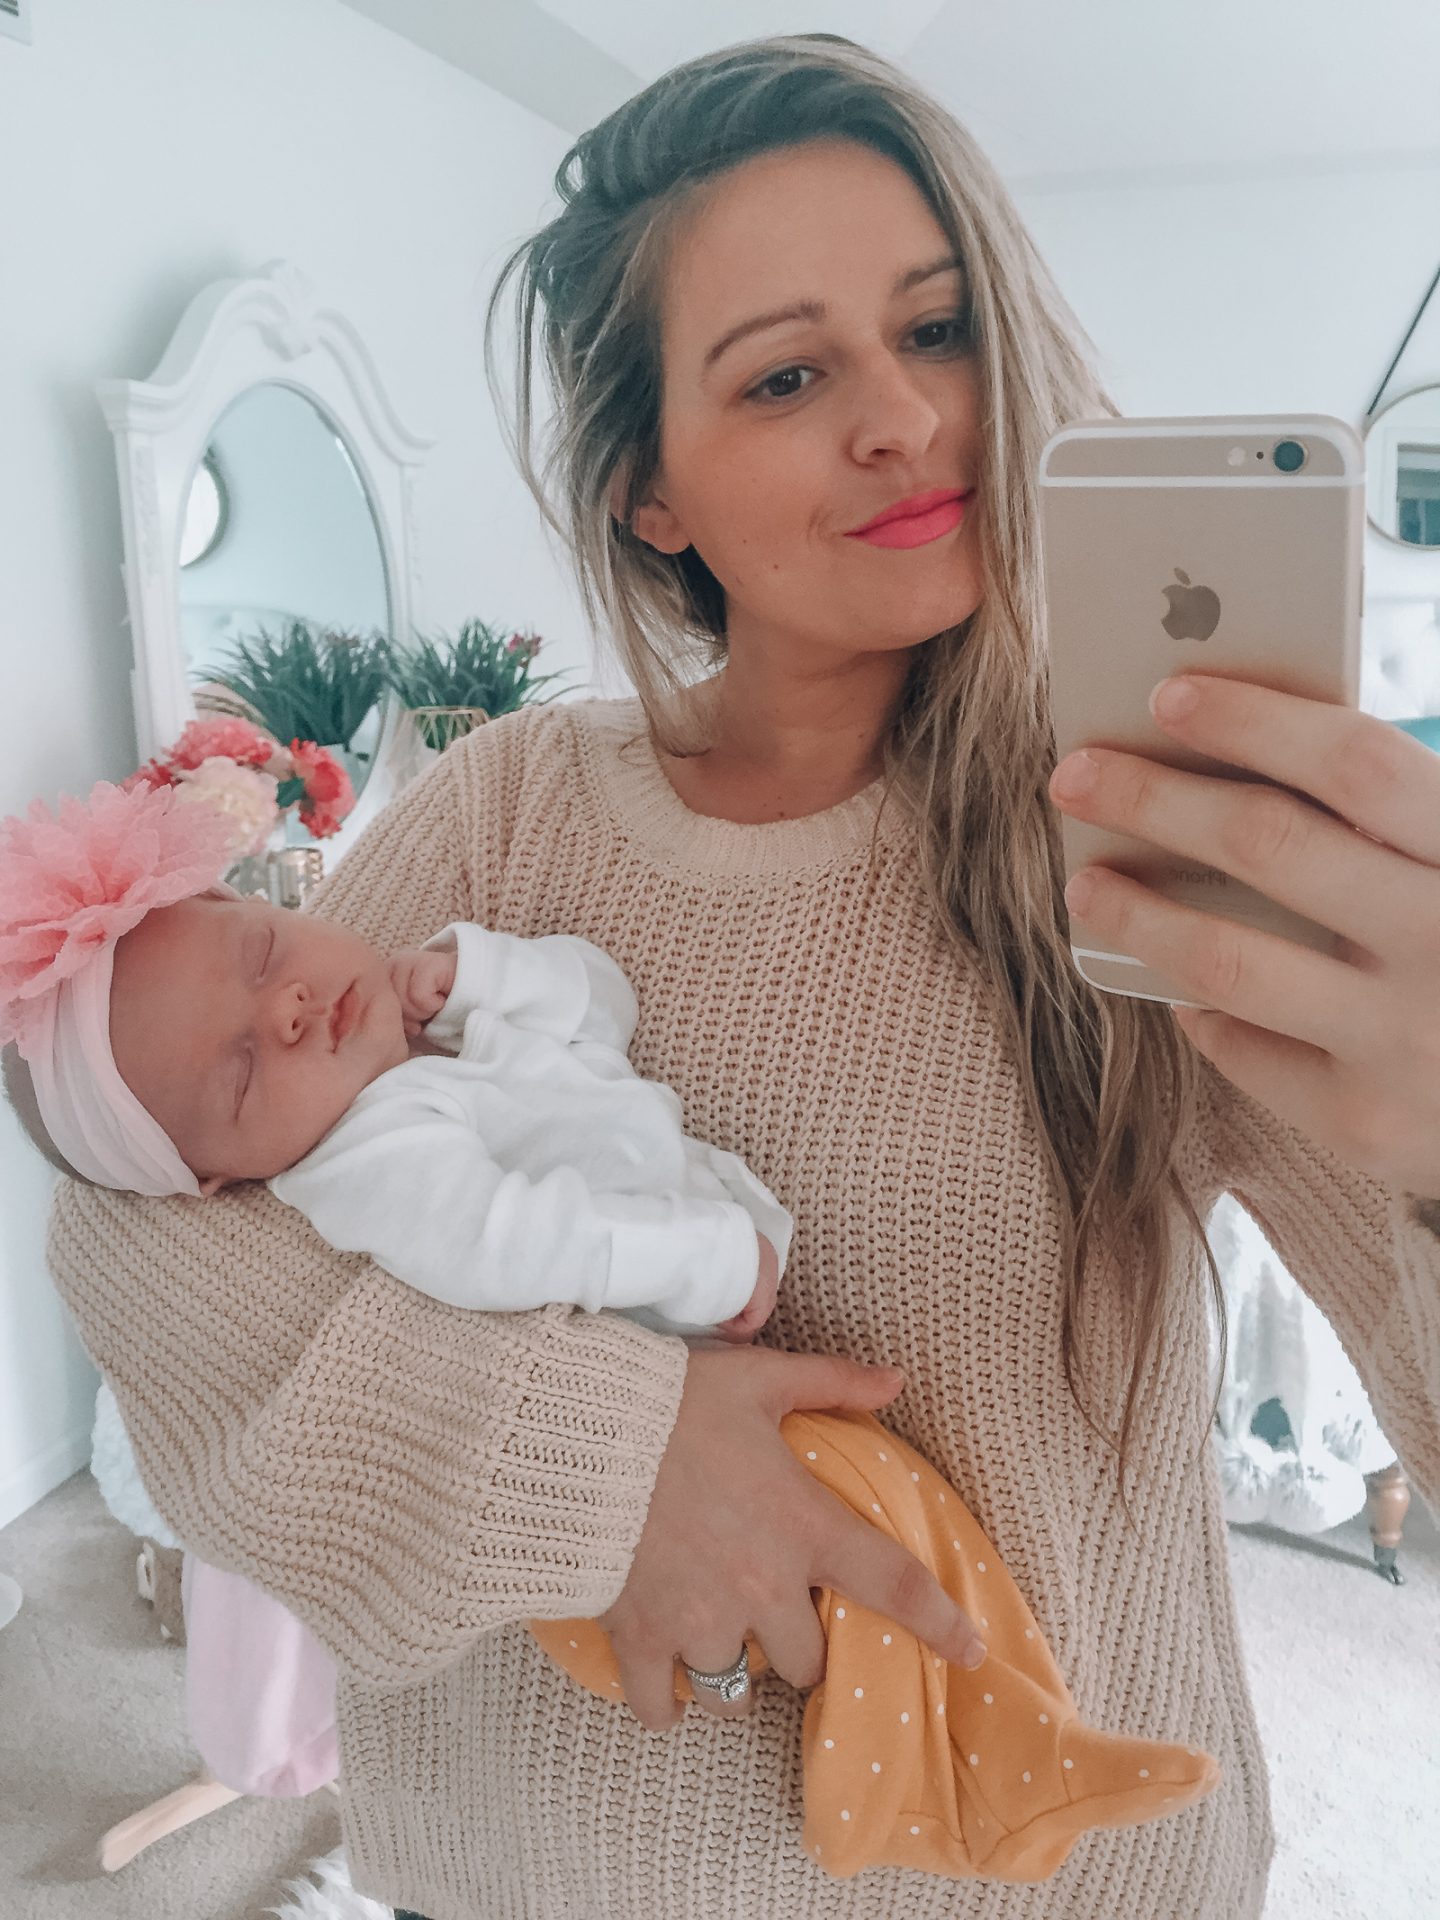 Chicago lifestyle blogger Happily Inspired is sharing how she specifically deals with loneliness as a mom. It doesn't have to be hard!